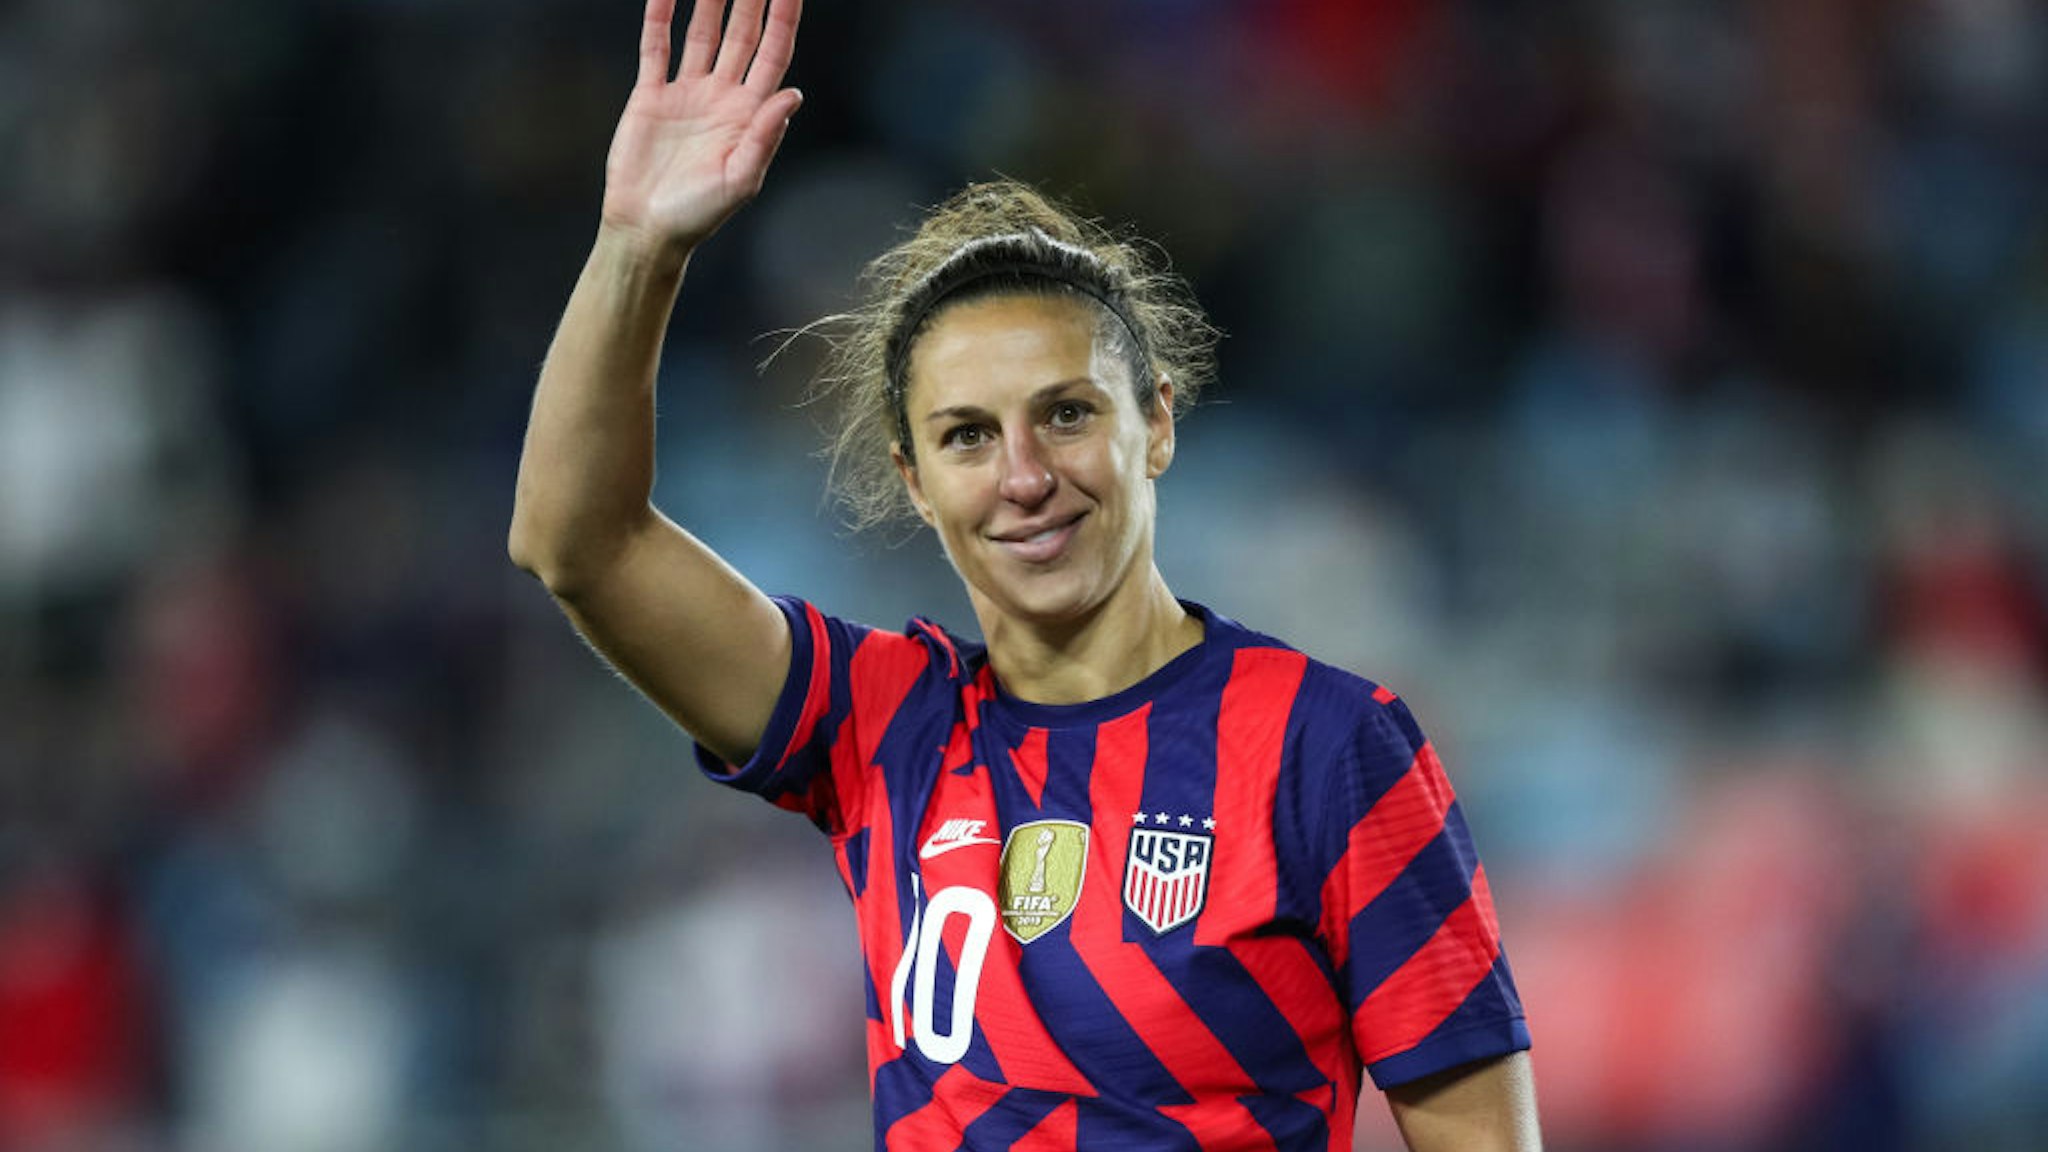 Carli Lloyd #10 of United States waves to fans after her final game as a member of the US Women's National Team at Allianz Field on October 26, 2021 in St Paul, Minnesota.